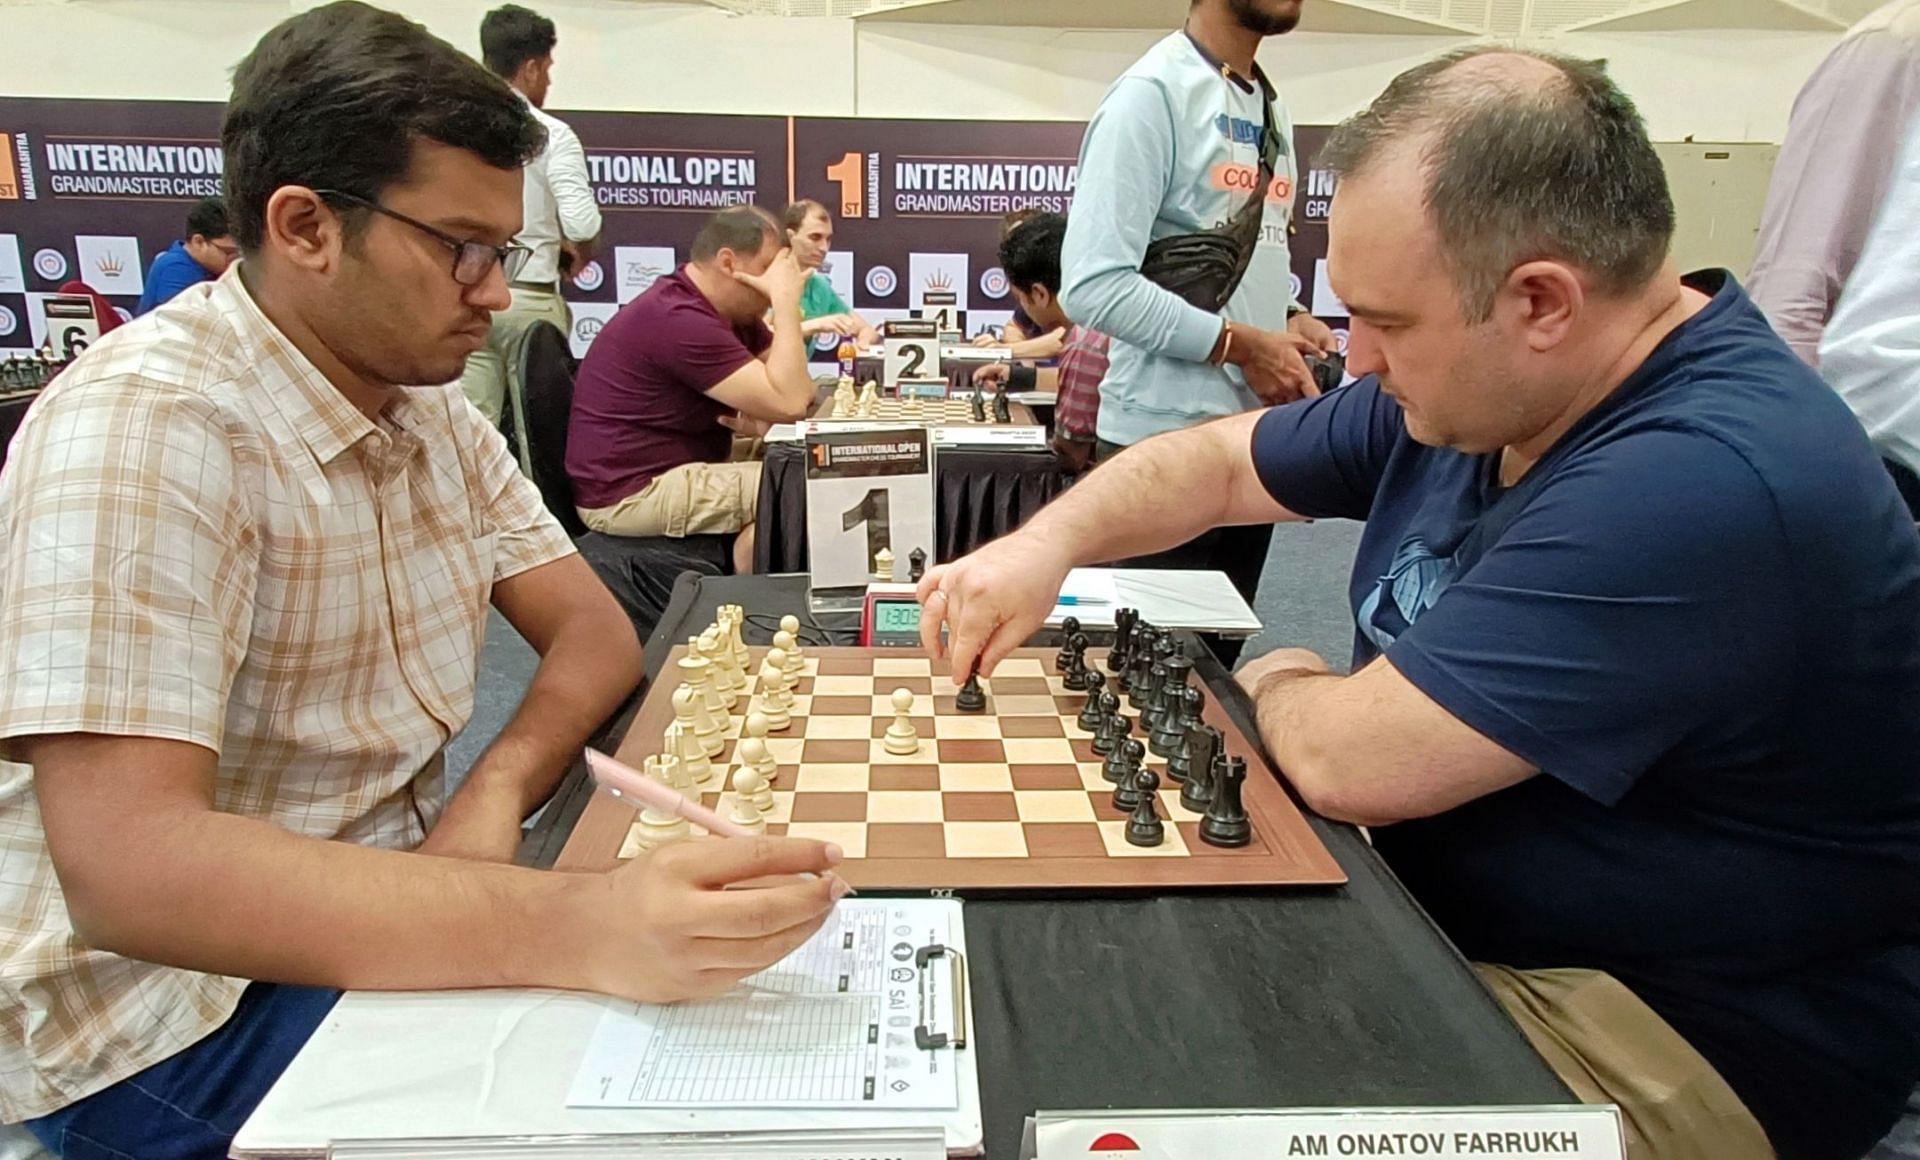 Top seed Farrukh Amonatov (R) pipped Indian GM Arjun Kalyan (L) and fourth seed Alexei Federov to emerge champion after all three players ended up with 8.5 points each. (Pic credit: AICF)